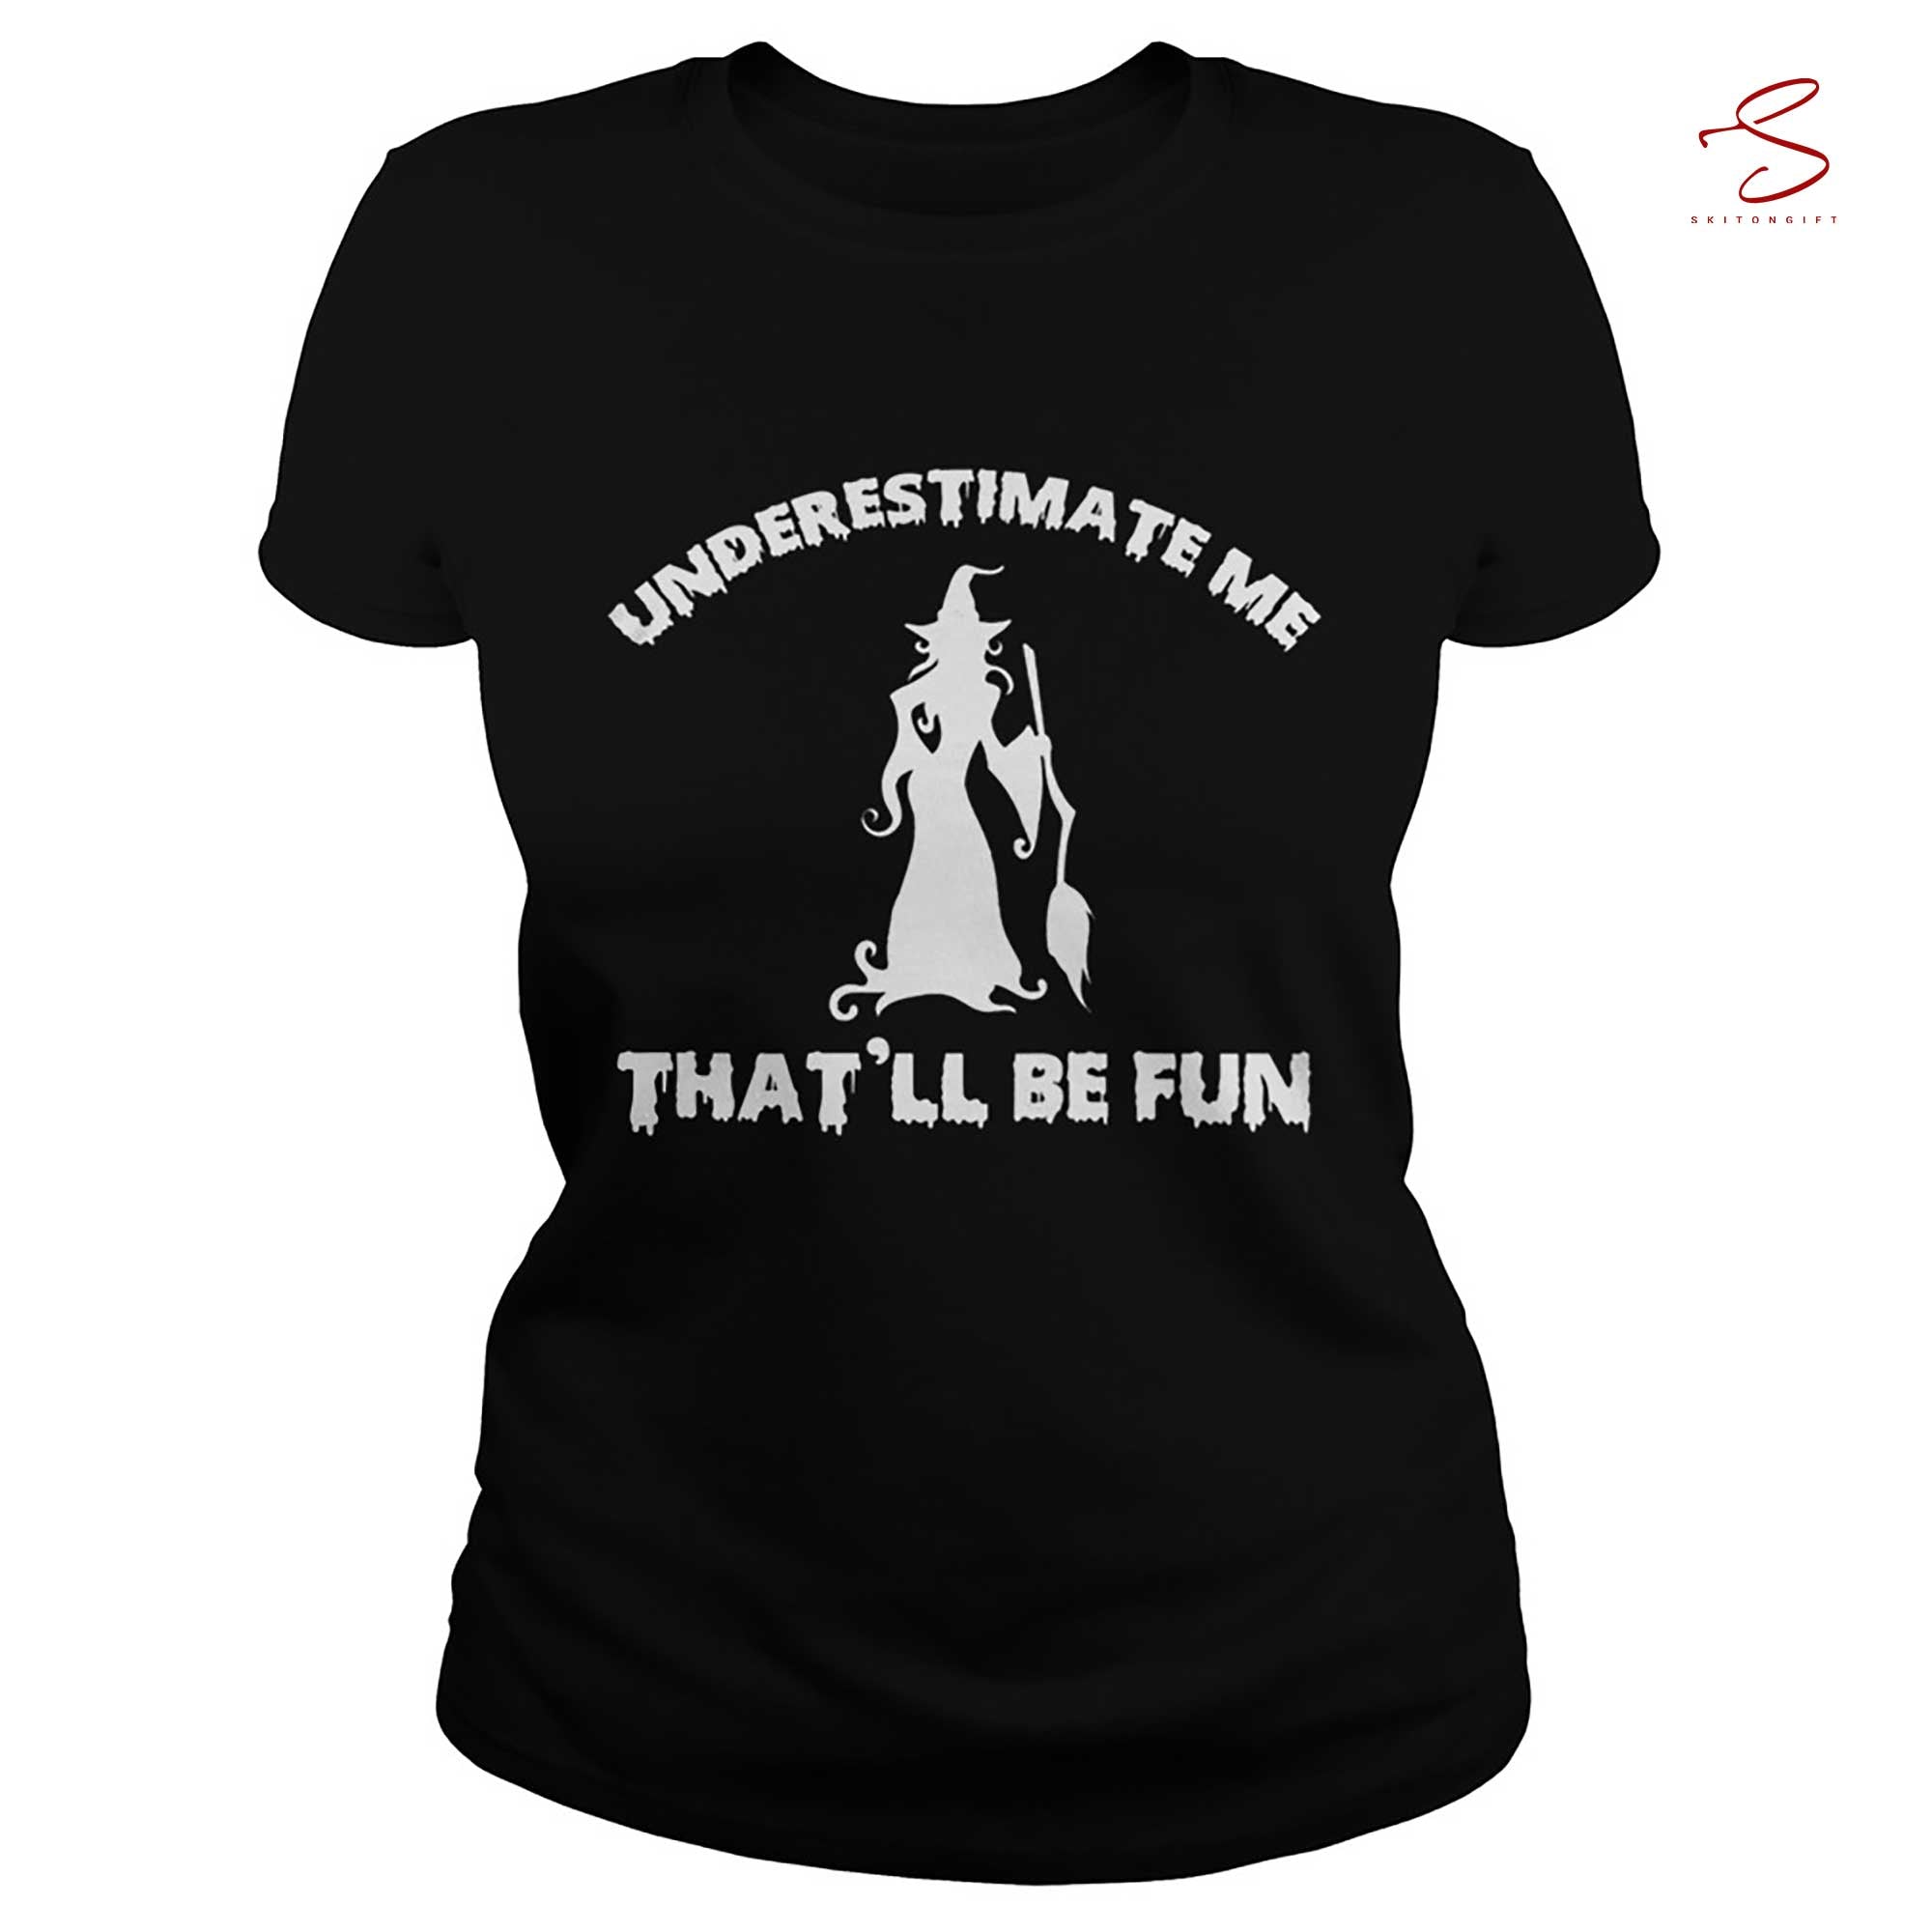 Skitongift Womens Funny Witch Halloween Underestimate Me Thatll Be Fun T Shirt Funny Shirts Hoodie Long Short Sleeve Casual Shirt